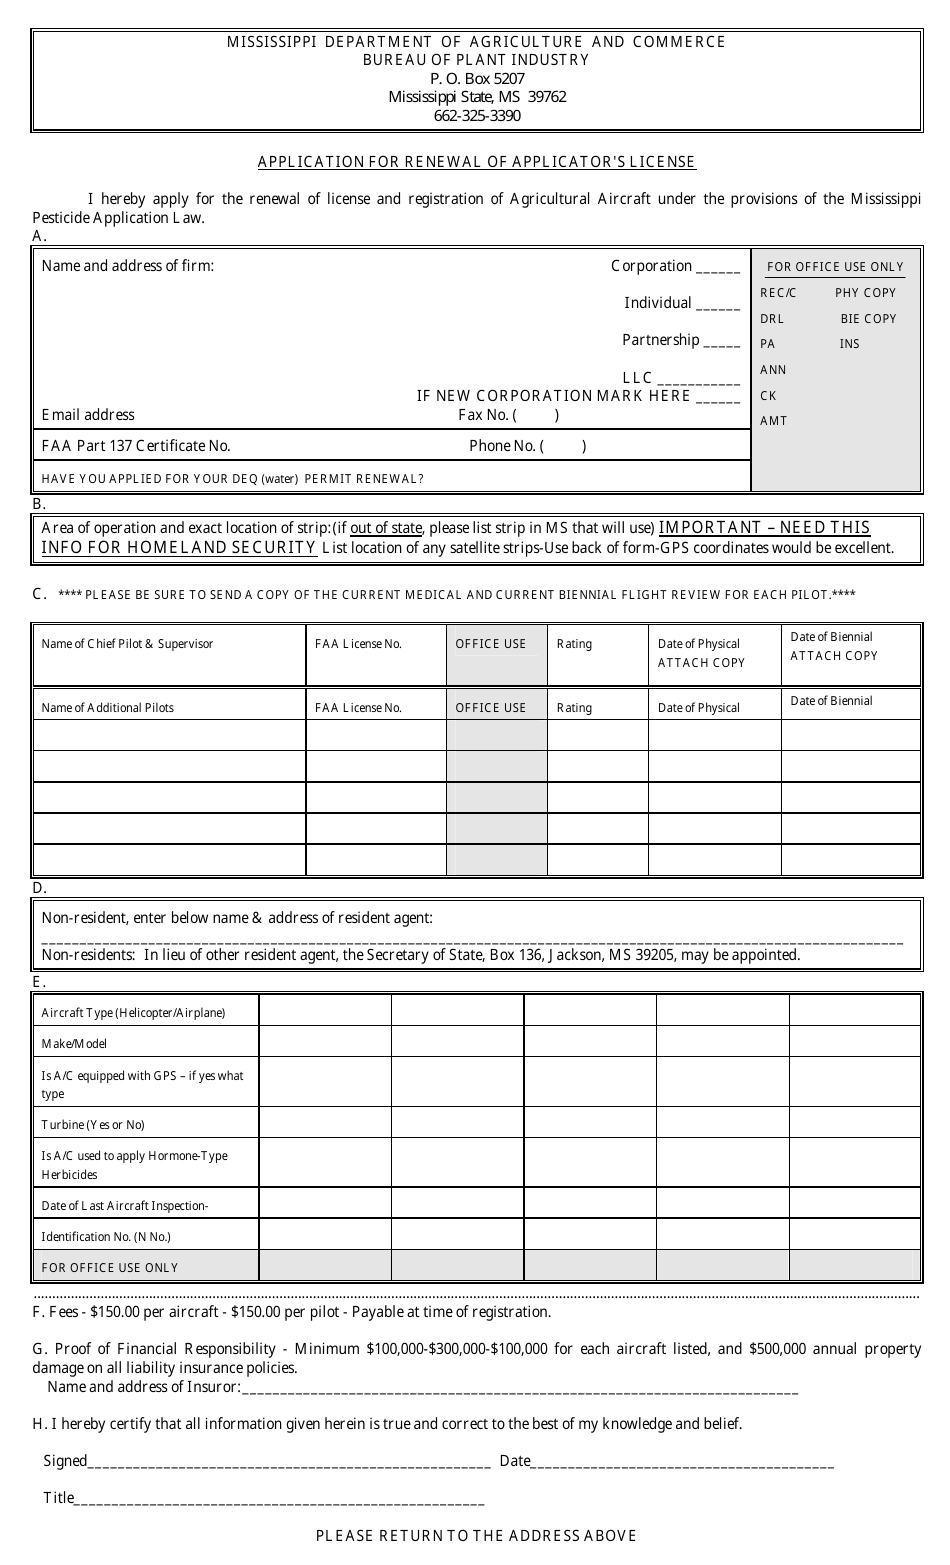 Application for Renewal of Applicators License - Mississippi, Page 1